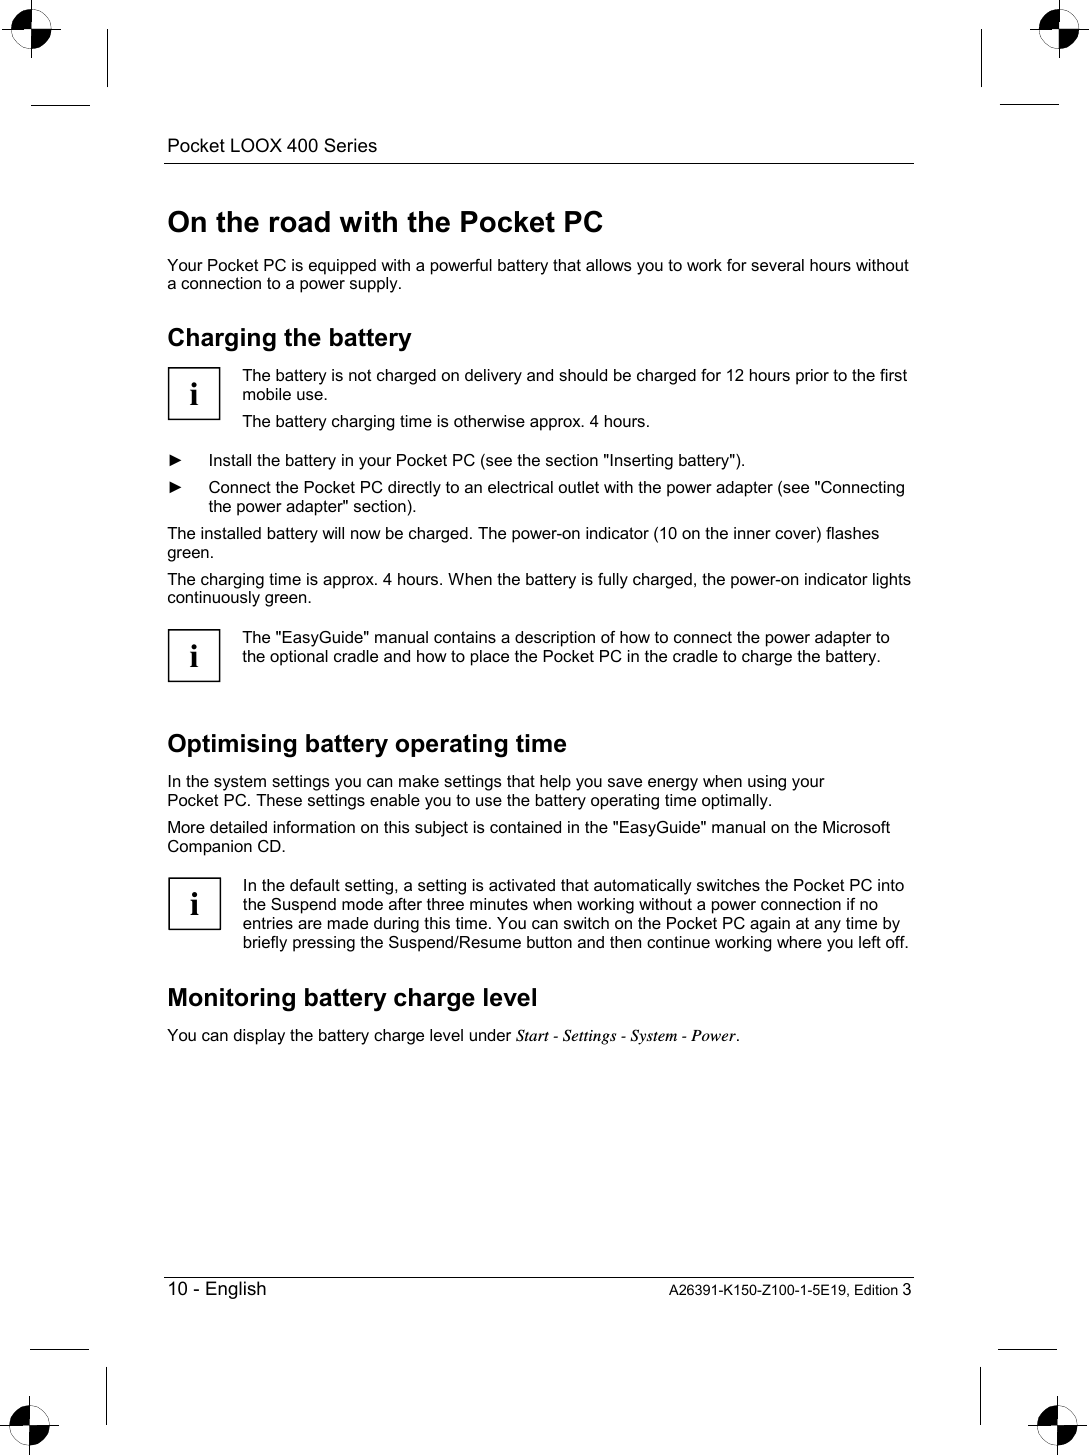 Pocket LOOX 400 Series   10 - English A26391-K150-Z100-1-5E19, Edition 3 On the road with the Pocket PC Your Pocket PC is equipped with a powerful battery that allows you to work for several hours without a connection to a power supply. Charging the battery i The battery is not charged on delivery and should be charged for 12 hours prior to the first mobile use. The battery charging time is otherwise approx. 4 hours.  ►  Install the battery in your Pocket PC (see the section &quot;Inserting battery&quot;). ►  Connect the Pocket PC directly to an electrical outlet with the power adapter (see &quot;Connecting the power adapter&quot; section). The installed battery will now be charged. The power-on indicator (10 on the inner cover) flashes green. The charging time is approx. 4 hours. When the battery is fully charged, the power-on indicator lights continuously green.  i The &quot;EasyGuide&quot; manual contains a description of how to connect the power adapter to the optional cradle and how to place the Pocket PC in the cradle to charge the battery.  Optimising battery operating time In the system settings you can make settings that help you save energy when using your Pocket PC. These settings enable you to use the battery operating time optimally. More detailed information on this subject is contained in the &quot;EasyGuide&quot; manual on the Microsoft Companion CD.  i In the default setting, a setting is activated that automatically switches the Pocket PC into the Suspend mode after three minutes when working without a power connection if no entries are made during this time. You can switch on the Pocket PC again at any time by briefly pressing the Suspend/Resume button and then continue working where you left off.  Monitoring battery charge level You can display the battery charge level under Start - Settings - System - Power. 